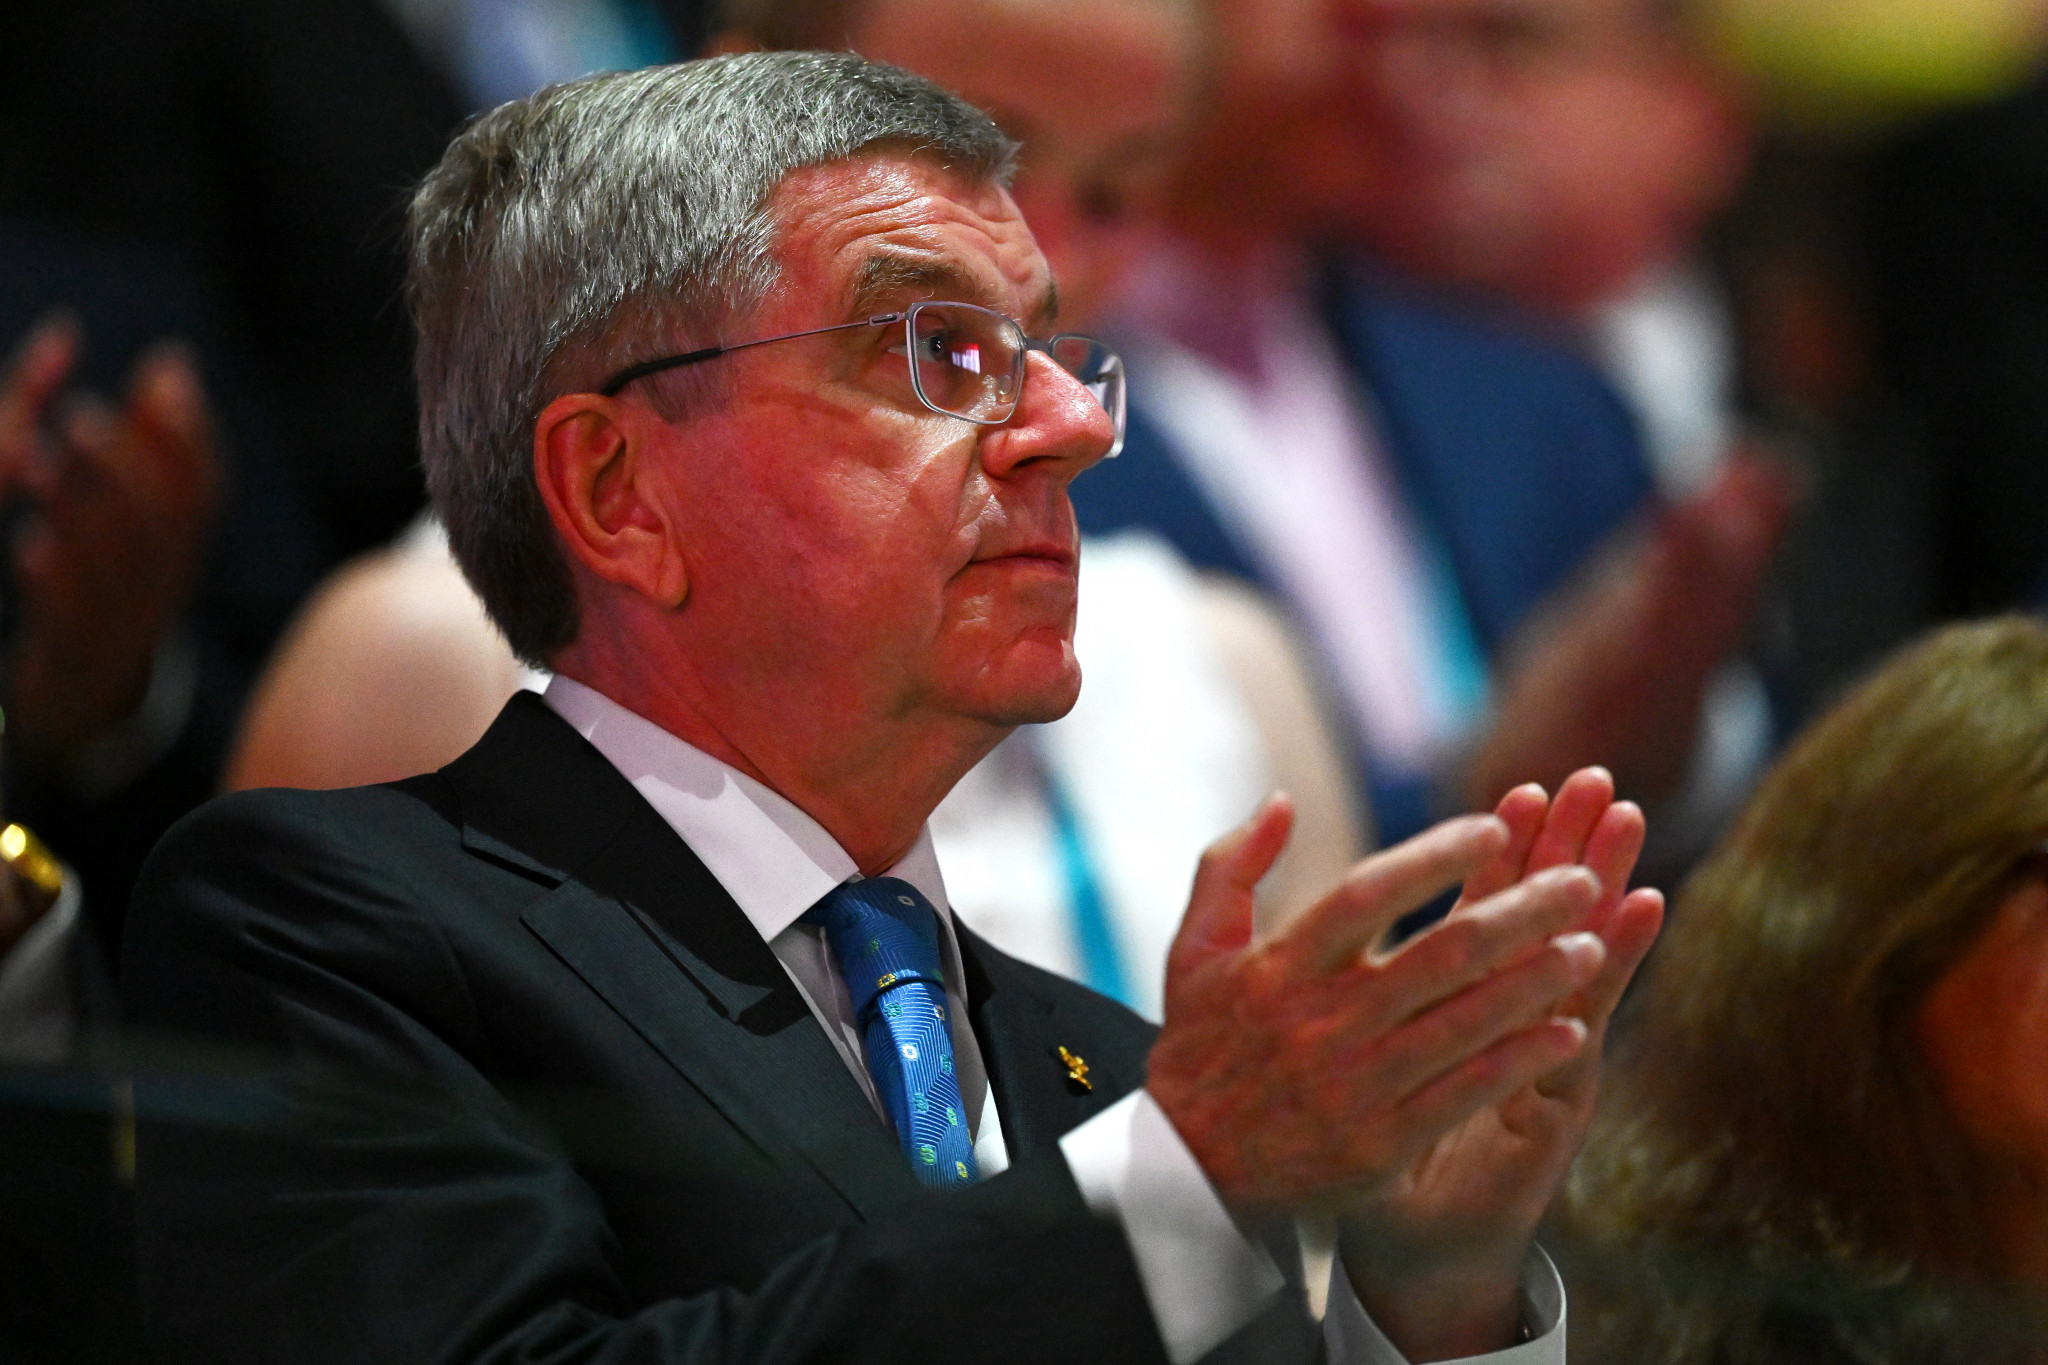 IOC President Thomas Bach has been criticised by Zelenskyy due to his stance on Russian and Belarusian participation ©Getty Images